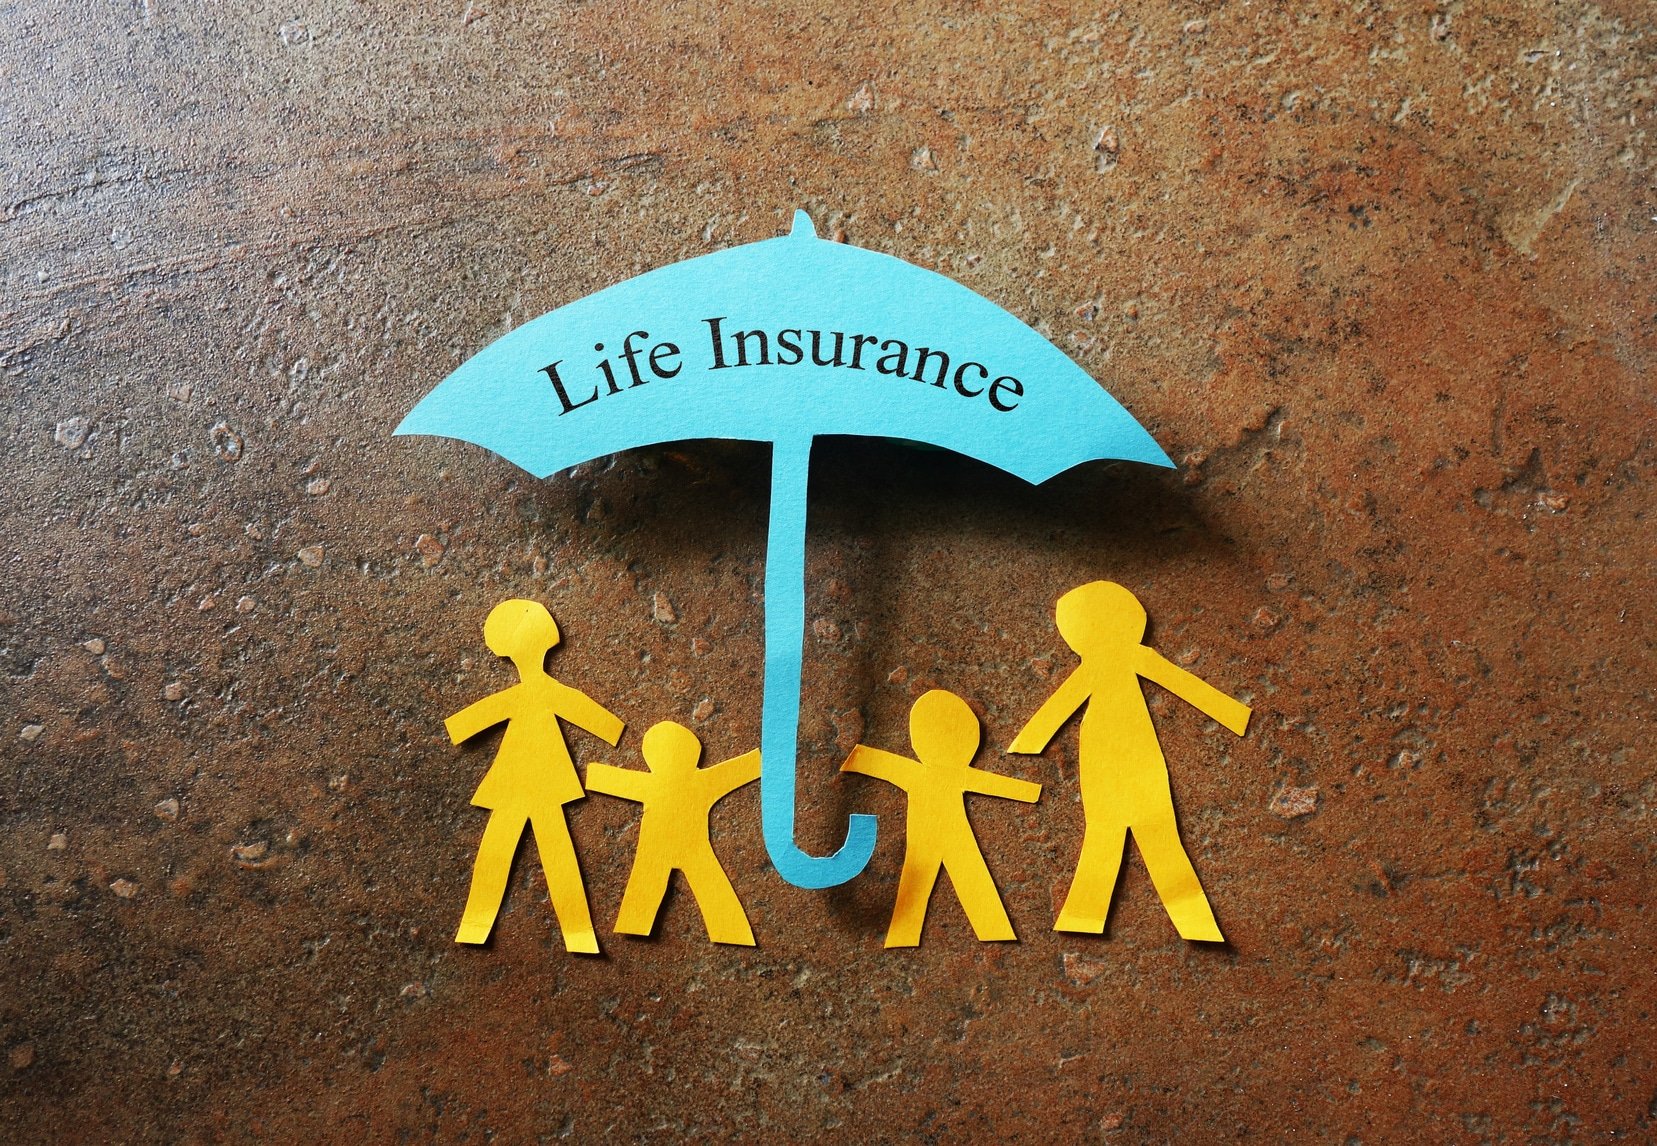 Term Life Insurance vs Whole Life Insurance The Key Differences Outlined